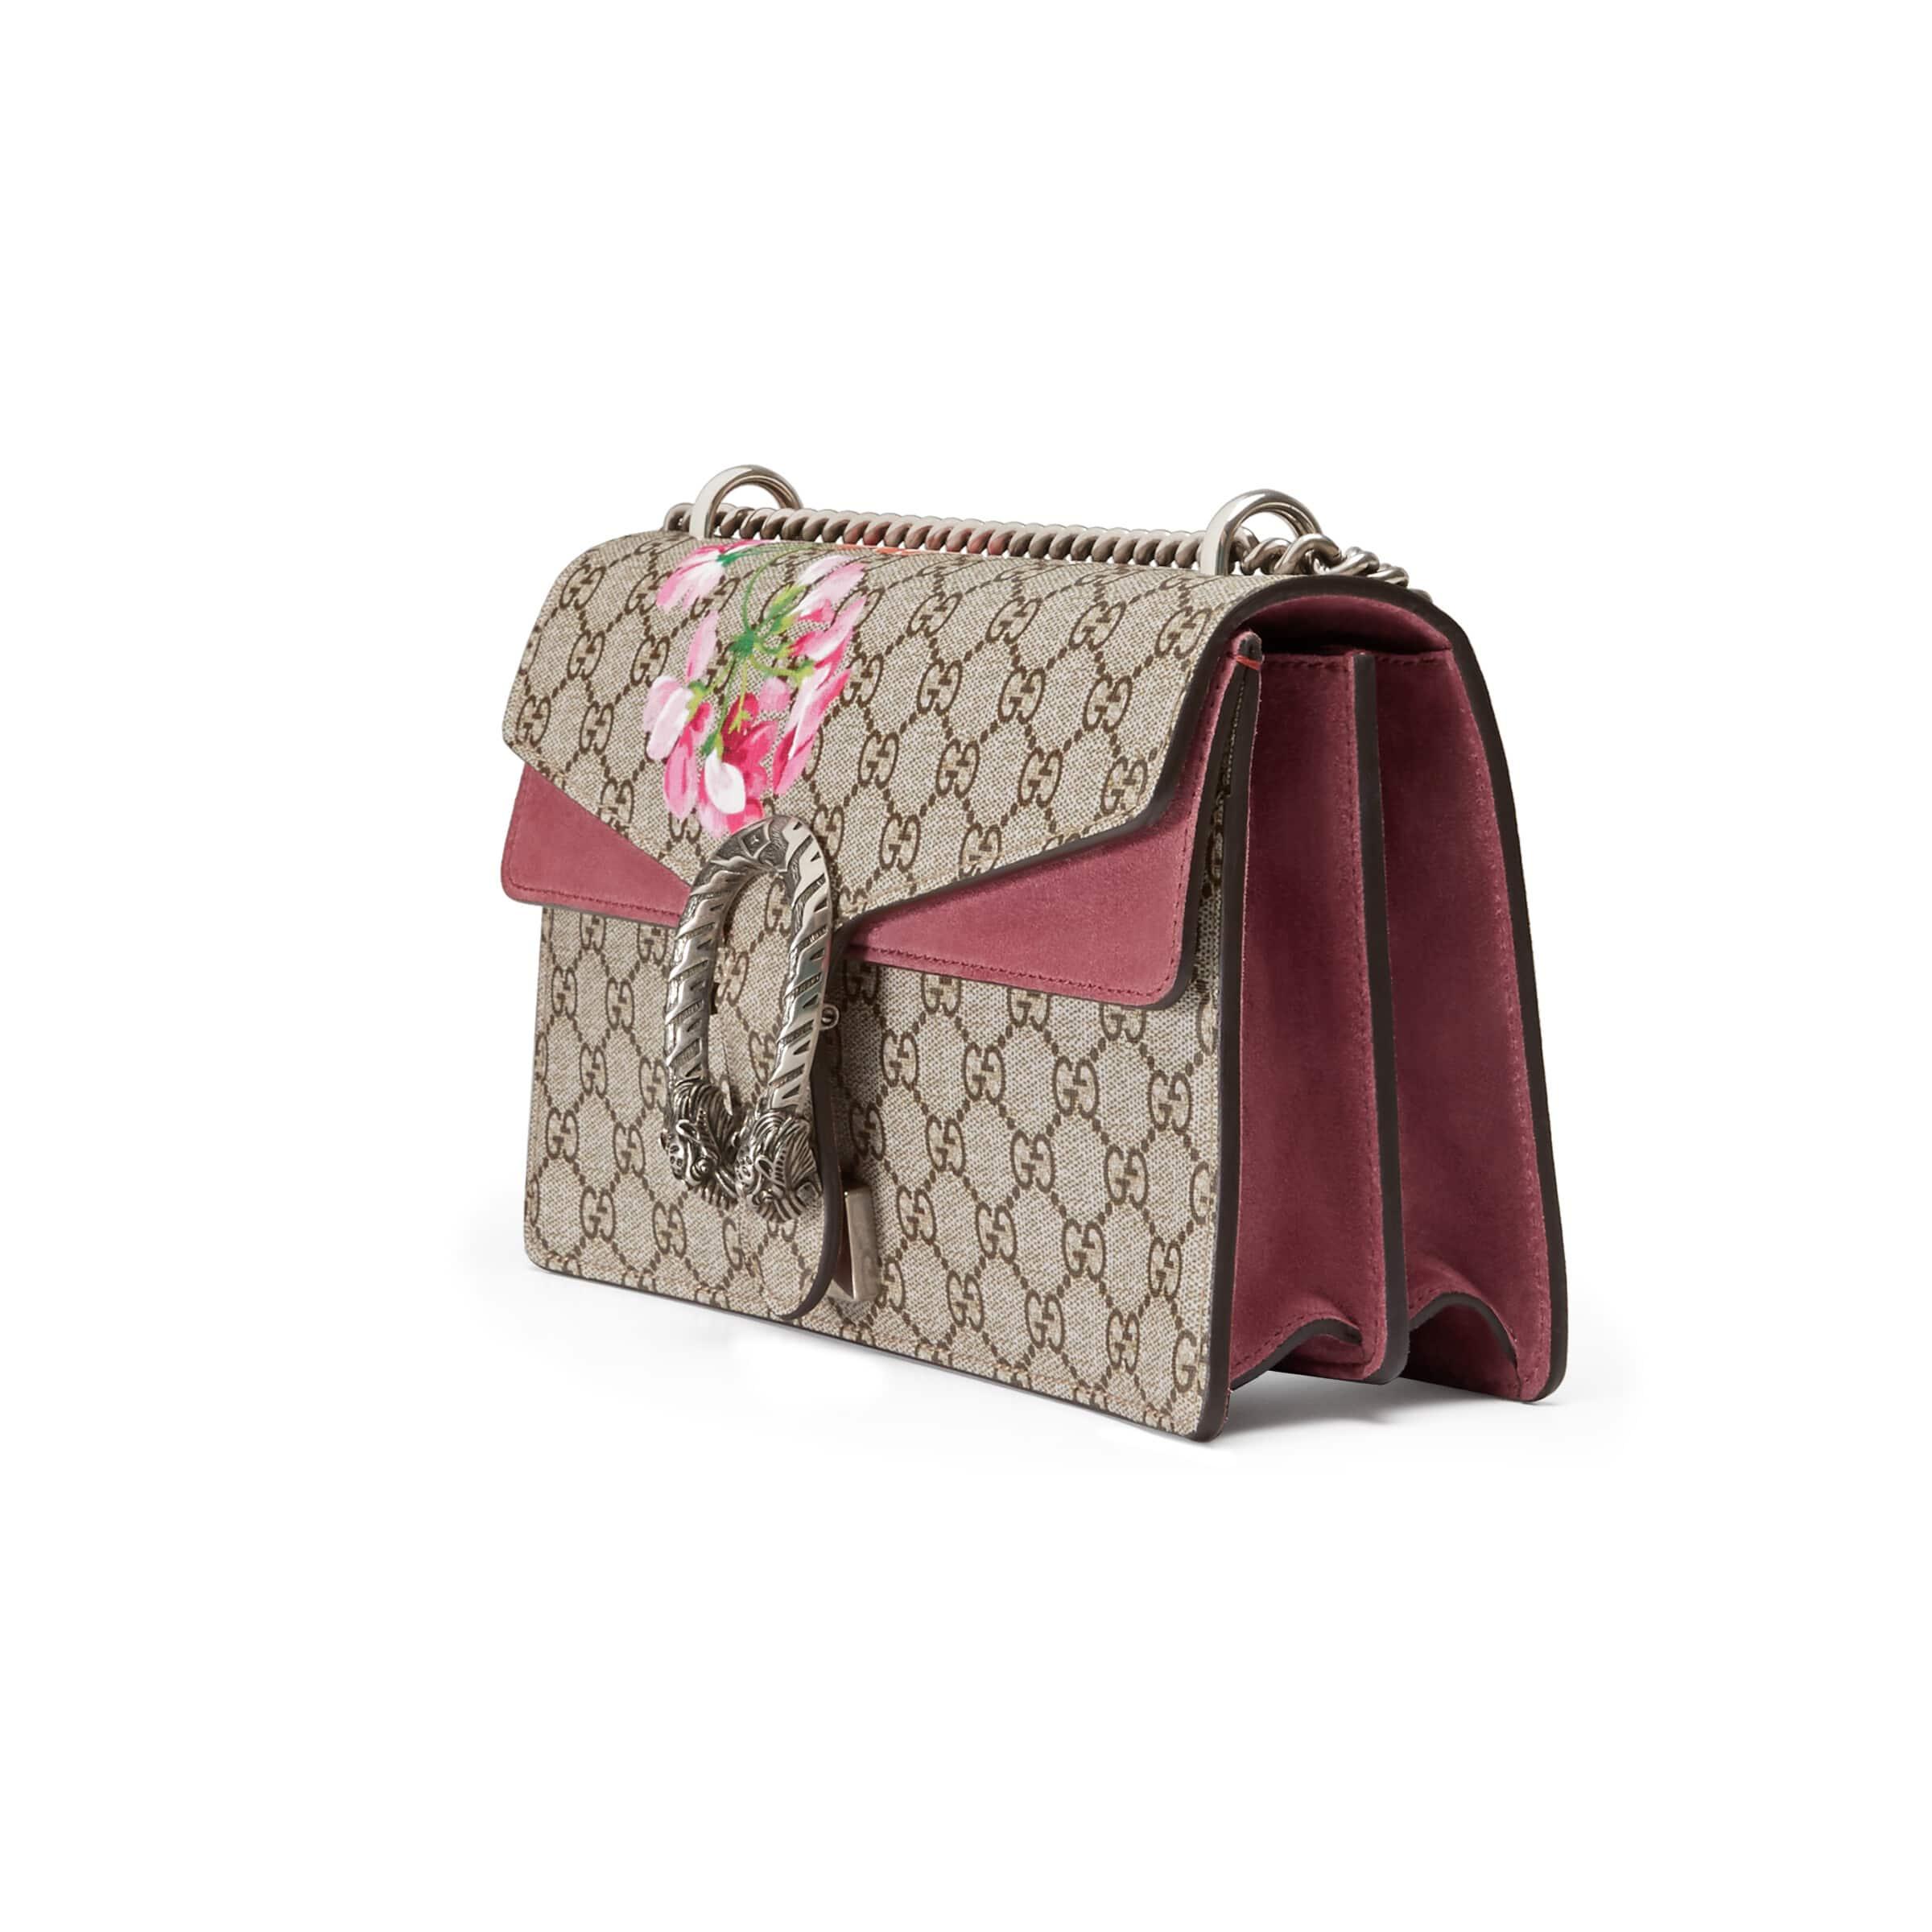 Gucci Canvas 2016 Re-edition Dionysus GG Blooms Bag in Beige 